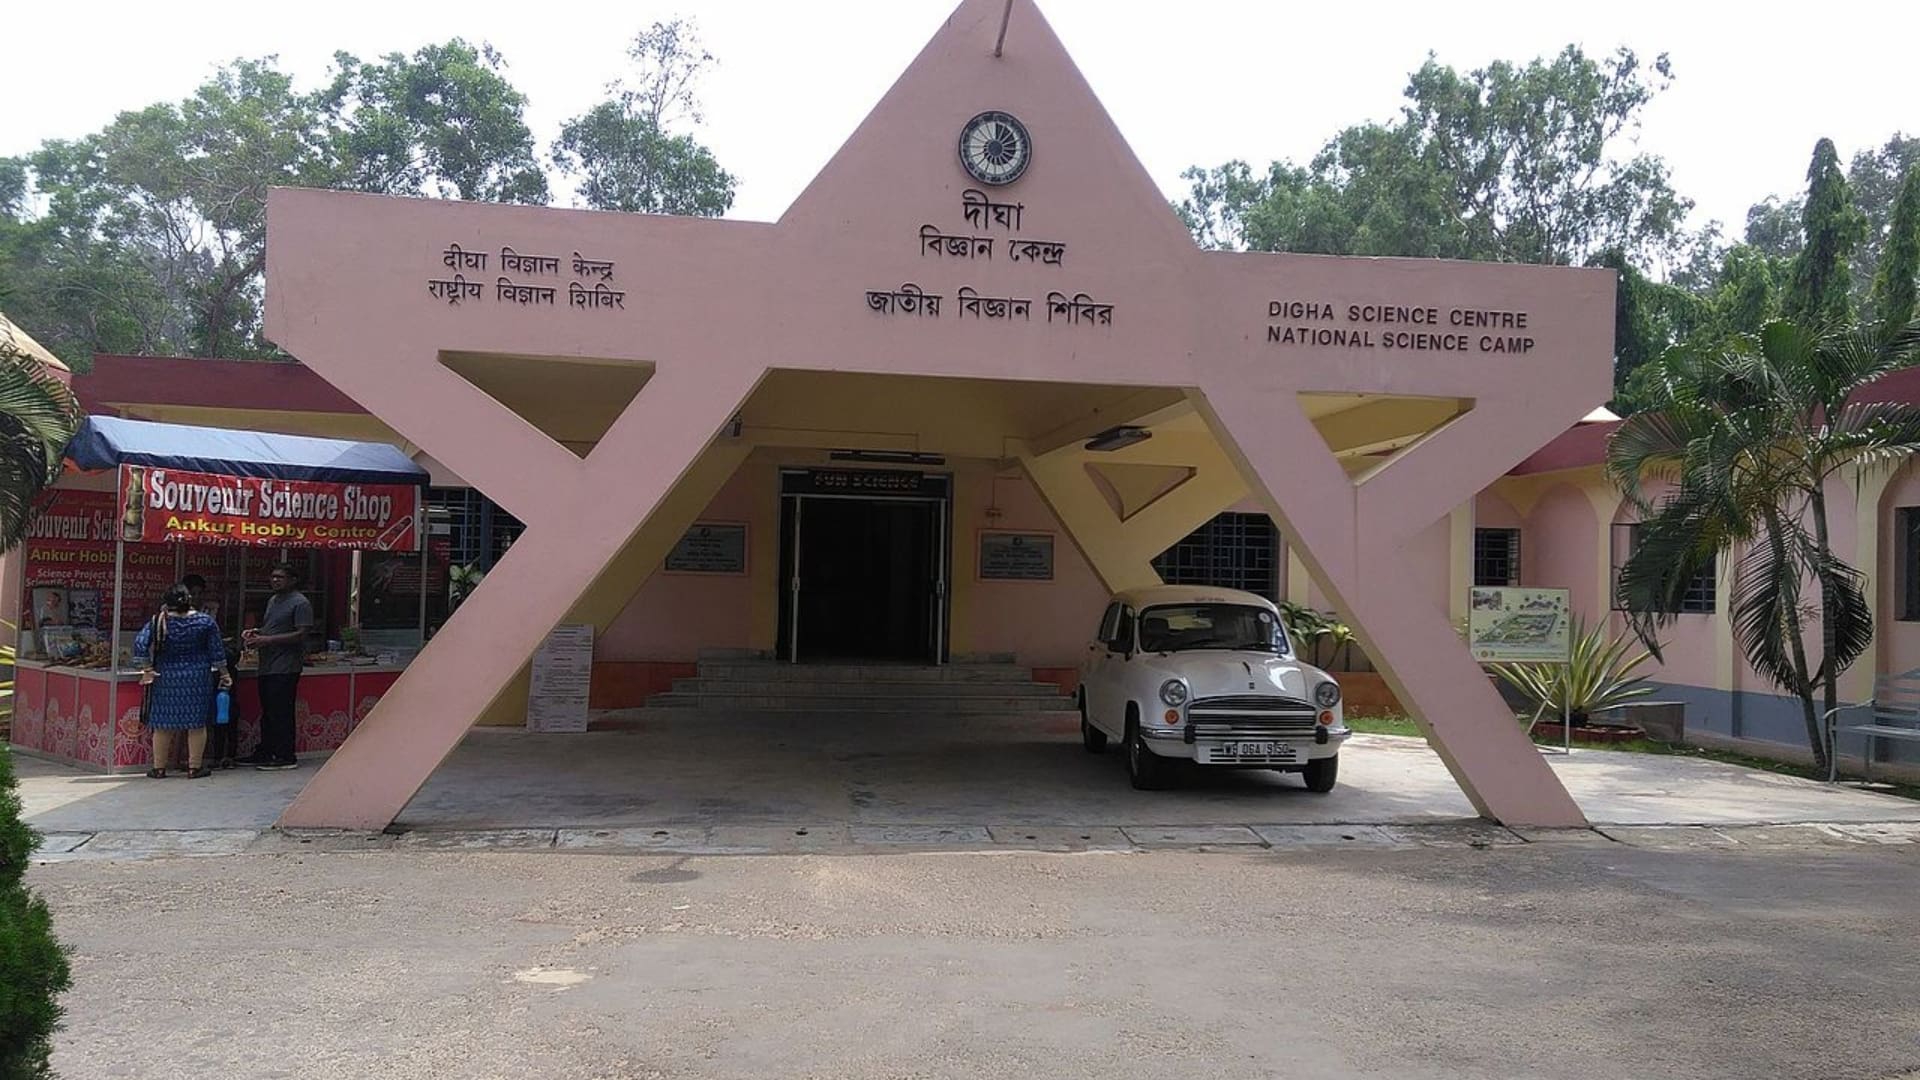 Digha Science Center and National Science Camp